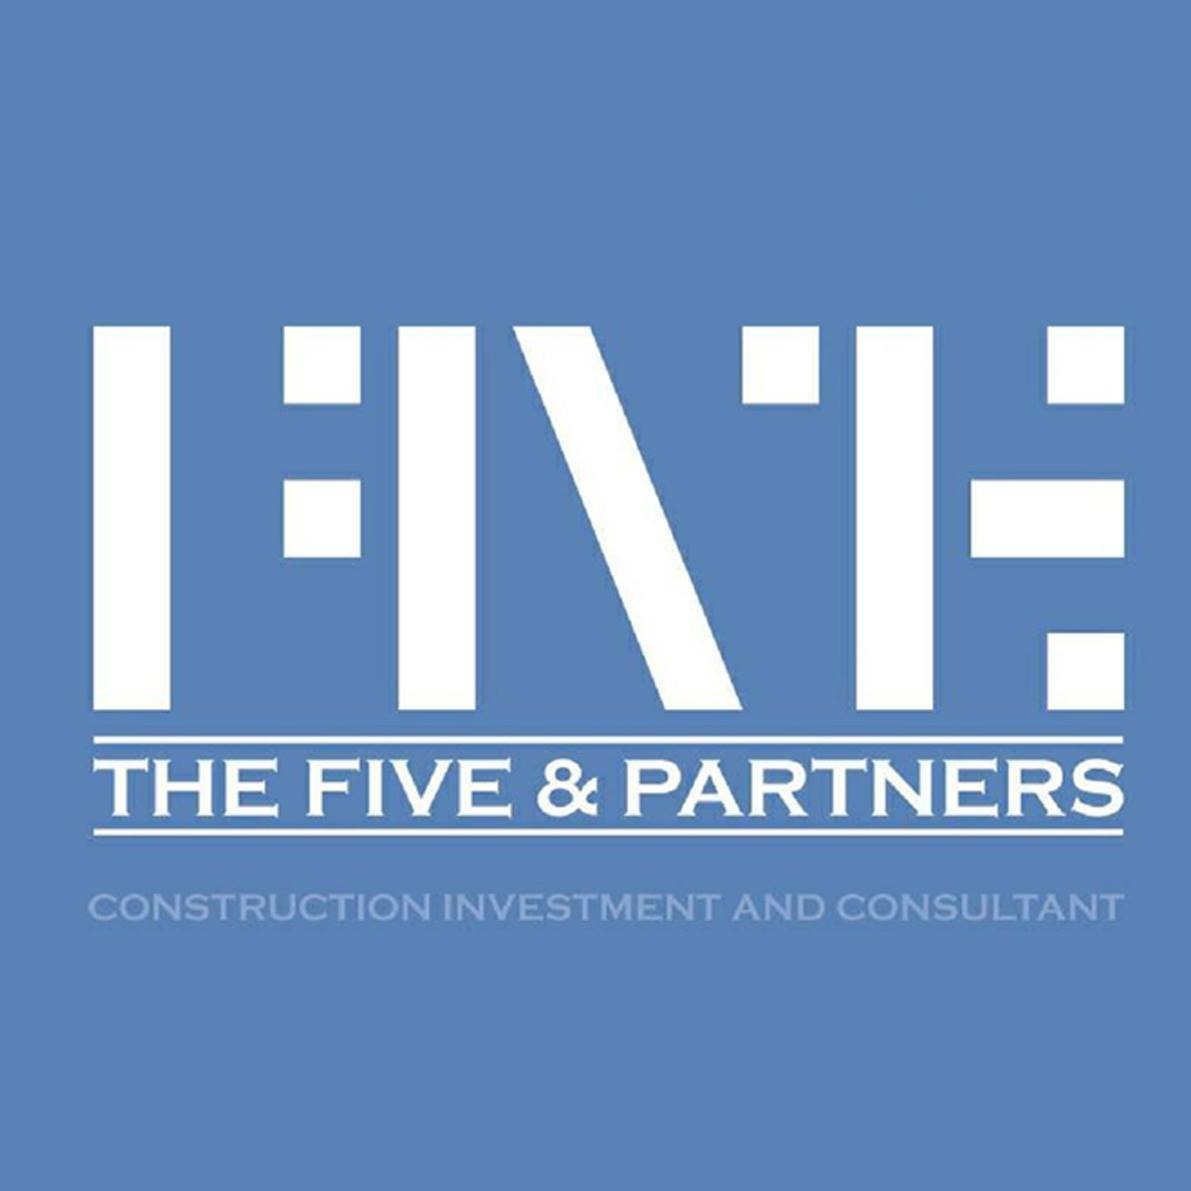 THE FIVE & PARTNERS